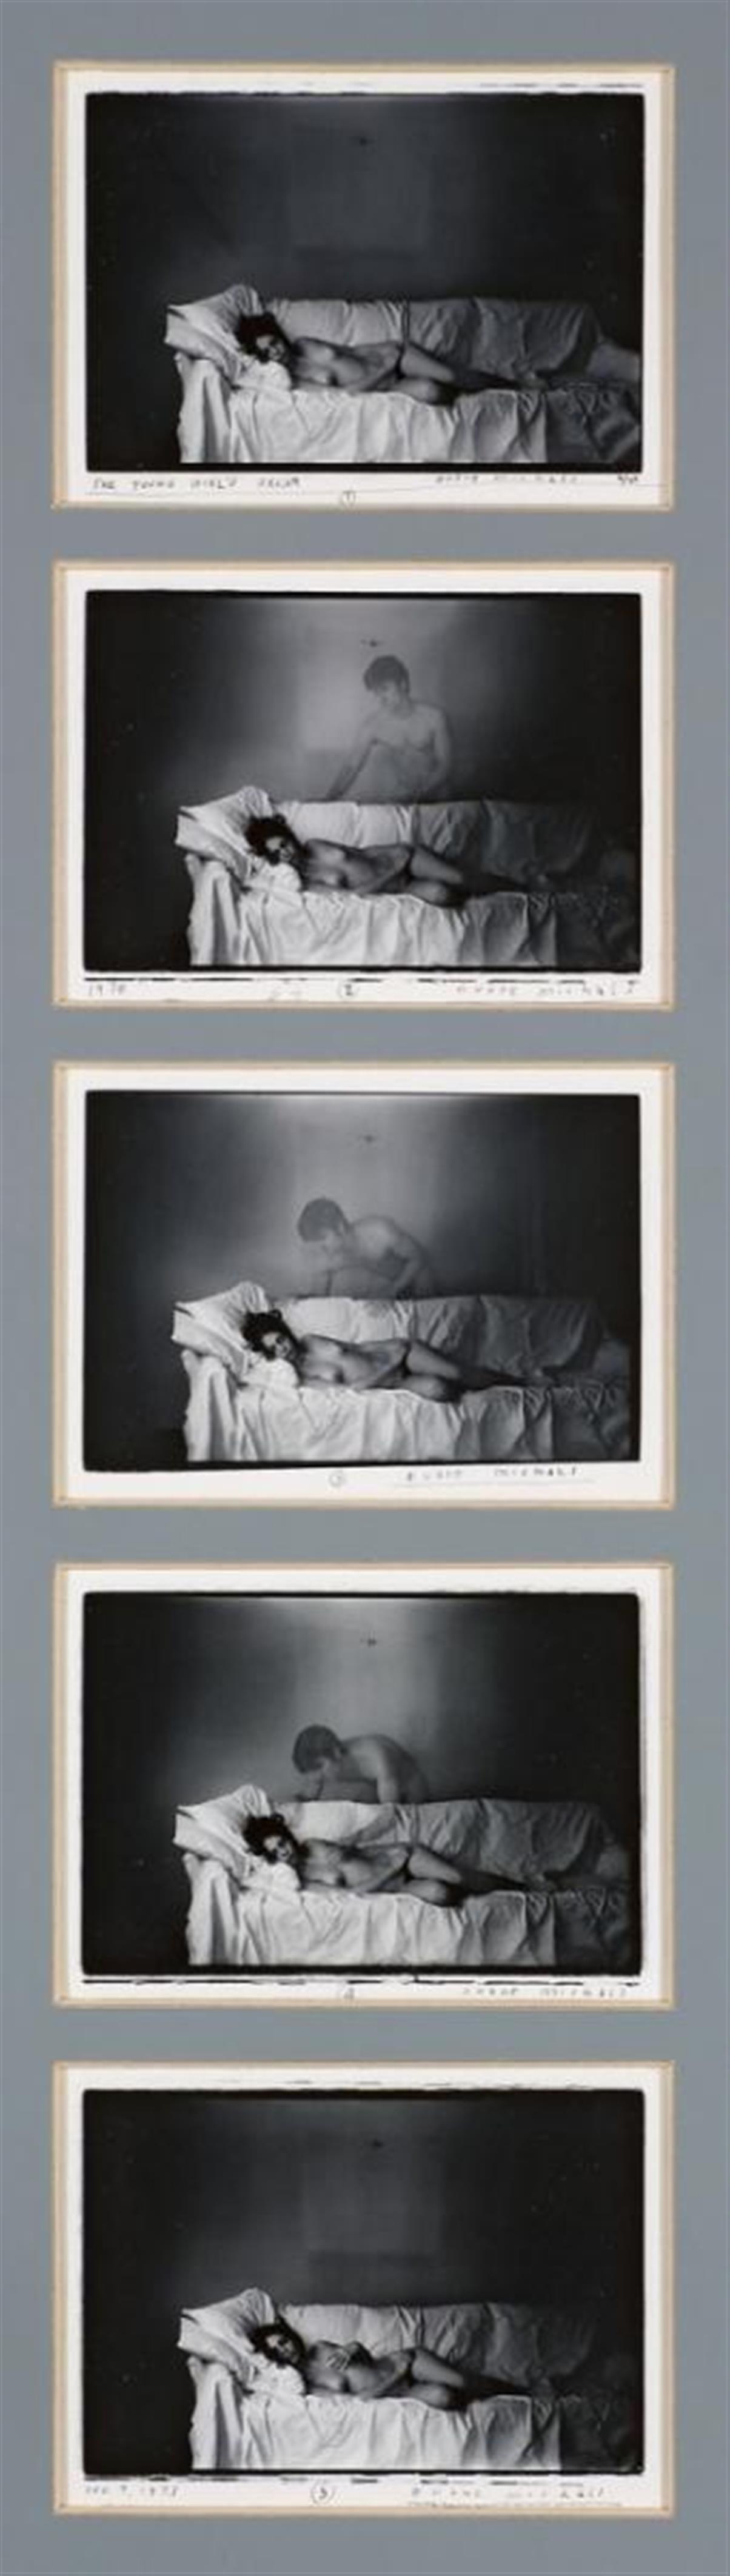 Duane Michals - THE YOUNG GIRL'S DREAM - image-1